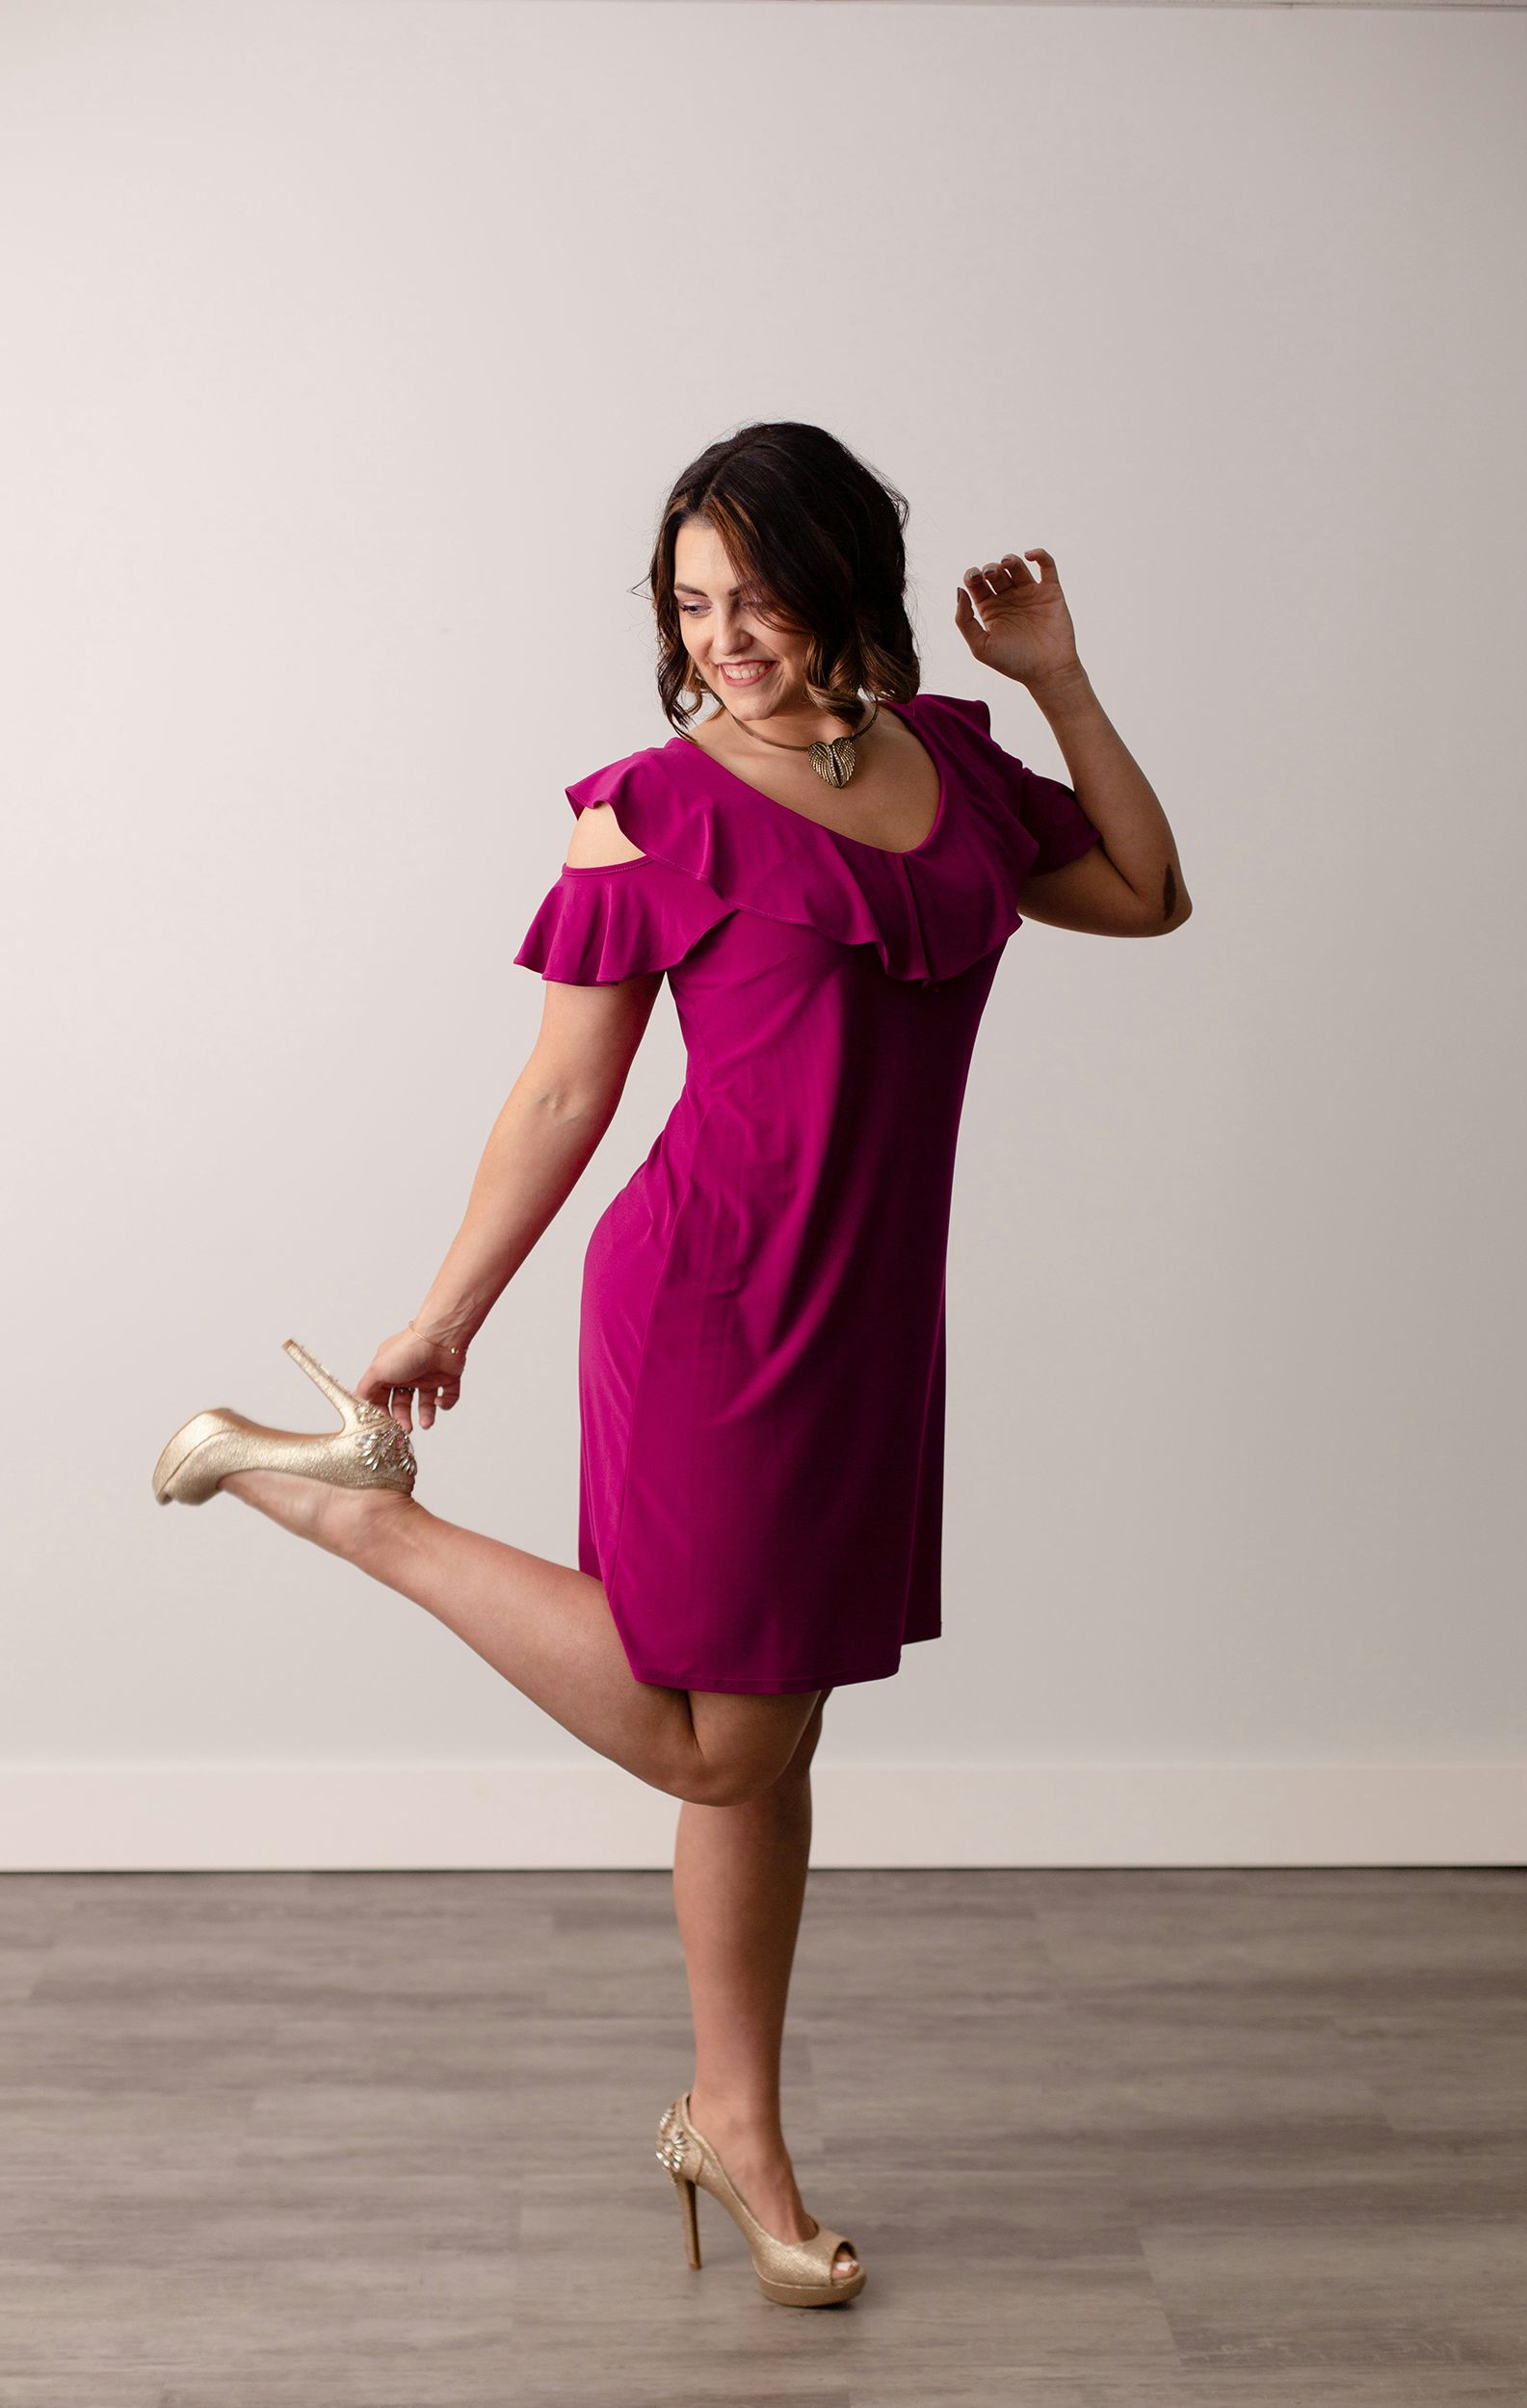 Megan in a loose-fitting purple dress, laughing and looking down while kicking up one foot behind her and touching a gold high heel